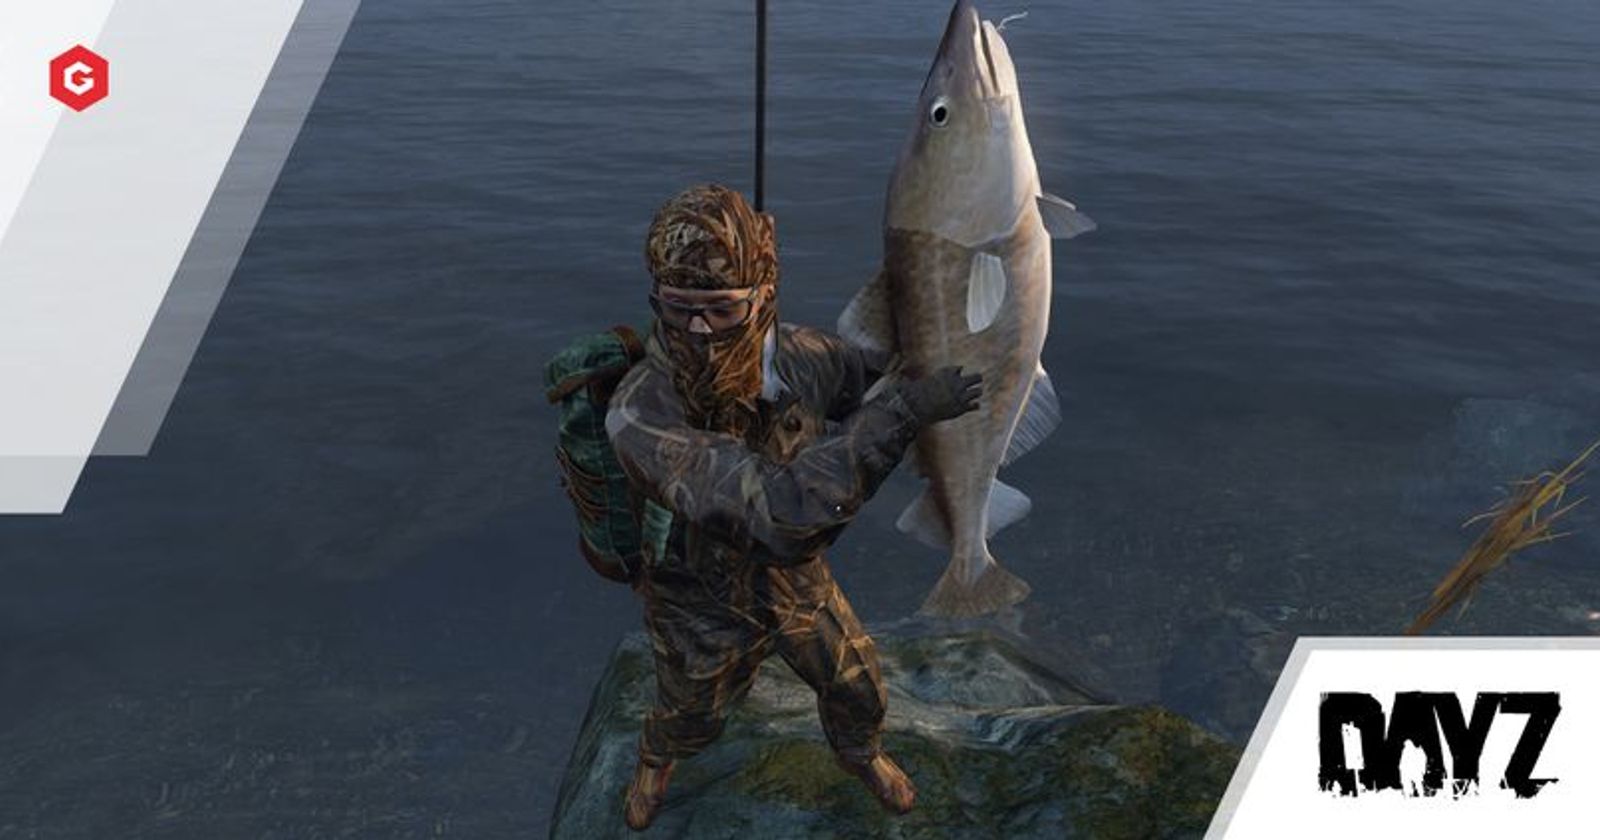 DayZ Fishing Guide: How To Catch Fish Using Fishing Rod, Hook And Bait